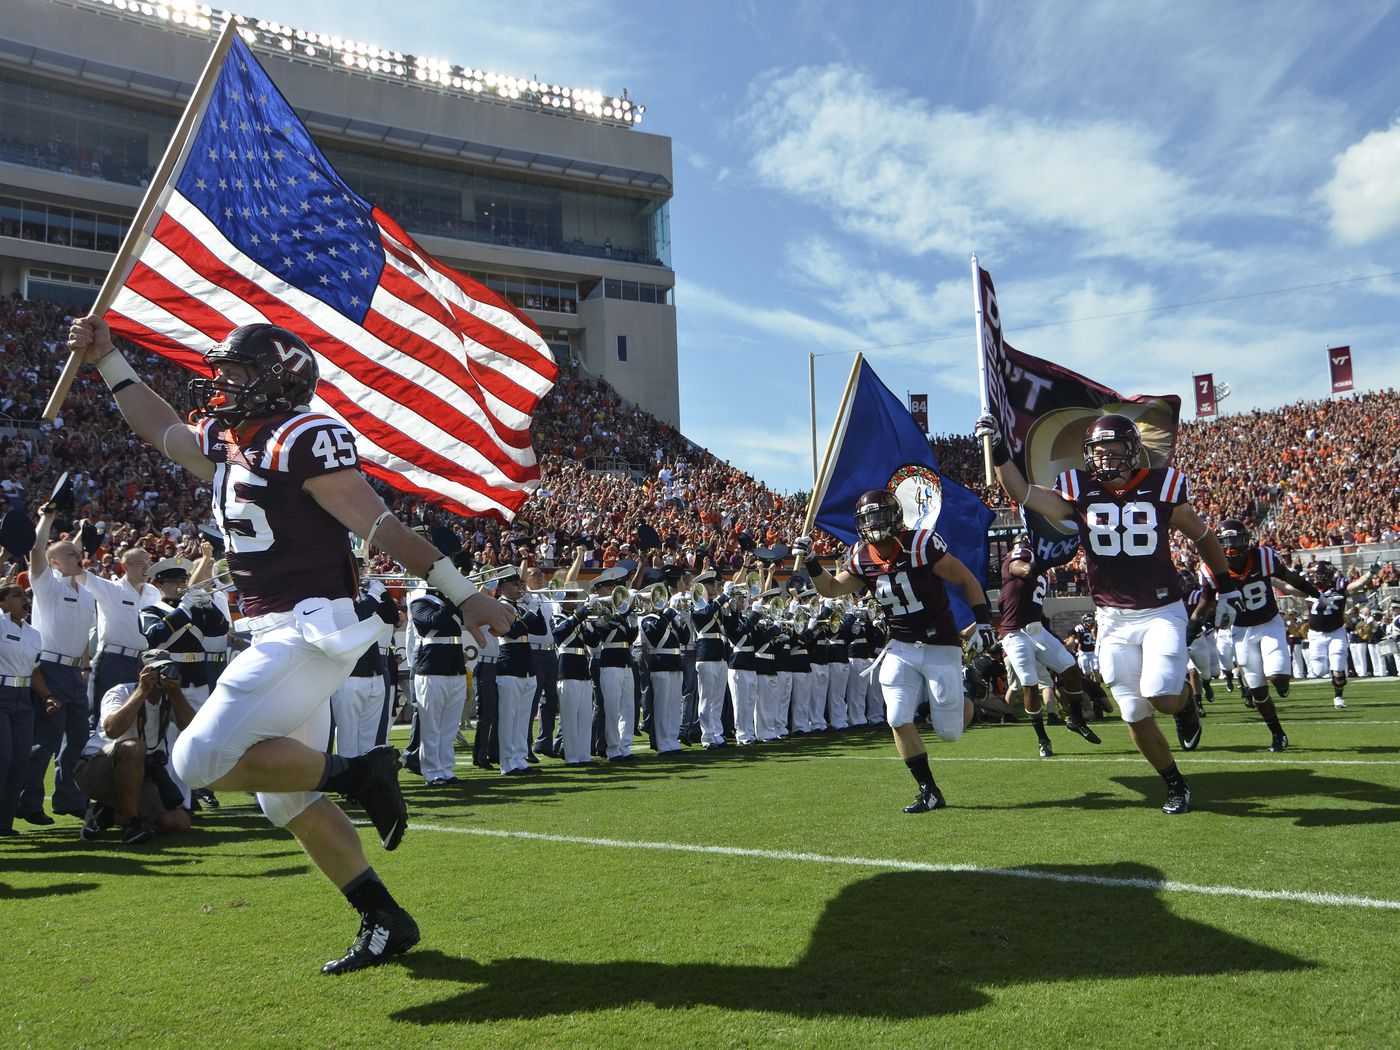 Virginia Tech S Enter Sandman Entrance The Best Things About